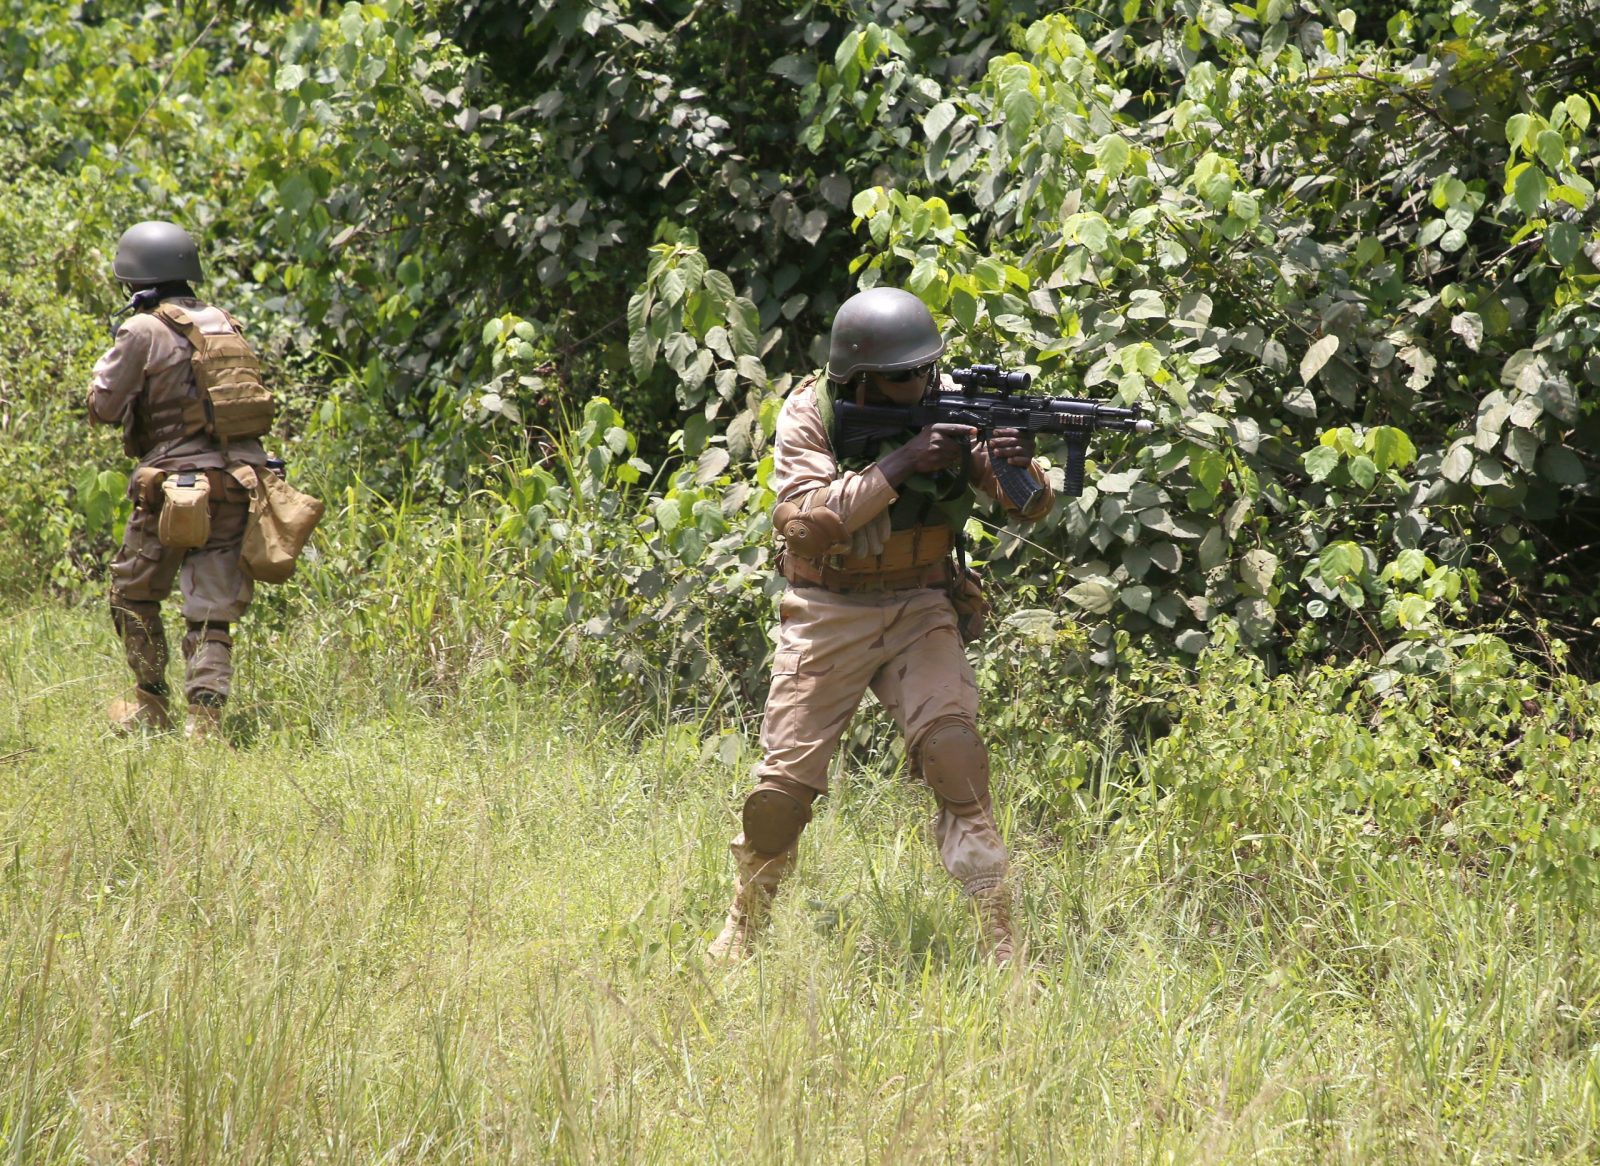 epa10515506 Nigeriens specials forces soldiers takes part in Flintlock 2023 which is a U.S. Africa Command annual special operations event, in Jacqueville, Ivory Coast, 11  March 2023. Flintlock is U.S. Africa Command's first and largest annual special operations exercise combining military and law enforcement to build the capabilities of African and international special operations forces. The exercise, which has been held since 2005, is conducted on the basis of mutual respect and collaboration to advance the common interests of regional stability. The host countries this year are Ghana and Ivory Coast, about 1300 soldiers from 30 countries are participating. Flintlock aims to build the capacity of key partner countries in the region to counter violent extremist groups, collaborate across borders and keep their people safe, while respecting human rights and building trust with civilian populations. The African countries participating this year are Burkina Faso, Cape Verde, Cameroon, Chad, Côte d'Ivoire, Ghana, Libya, Mauritania, Niger, Nigeria, Senegal, South Africa, Togo, Morocco and Tunisia. Other participants are Austria, Belgium, Brazil, Canada, Czech Republic, Denmark, France, Germany, Italy, Netherlands, Poland, Spain, UK United and the United States, according to U.S. Africa Command's official website.  EPA/LEGNAN KOULA